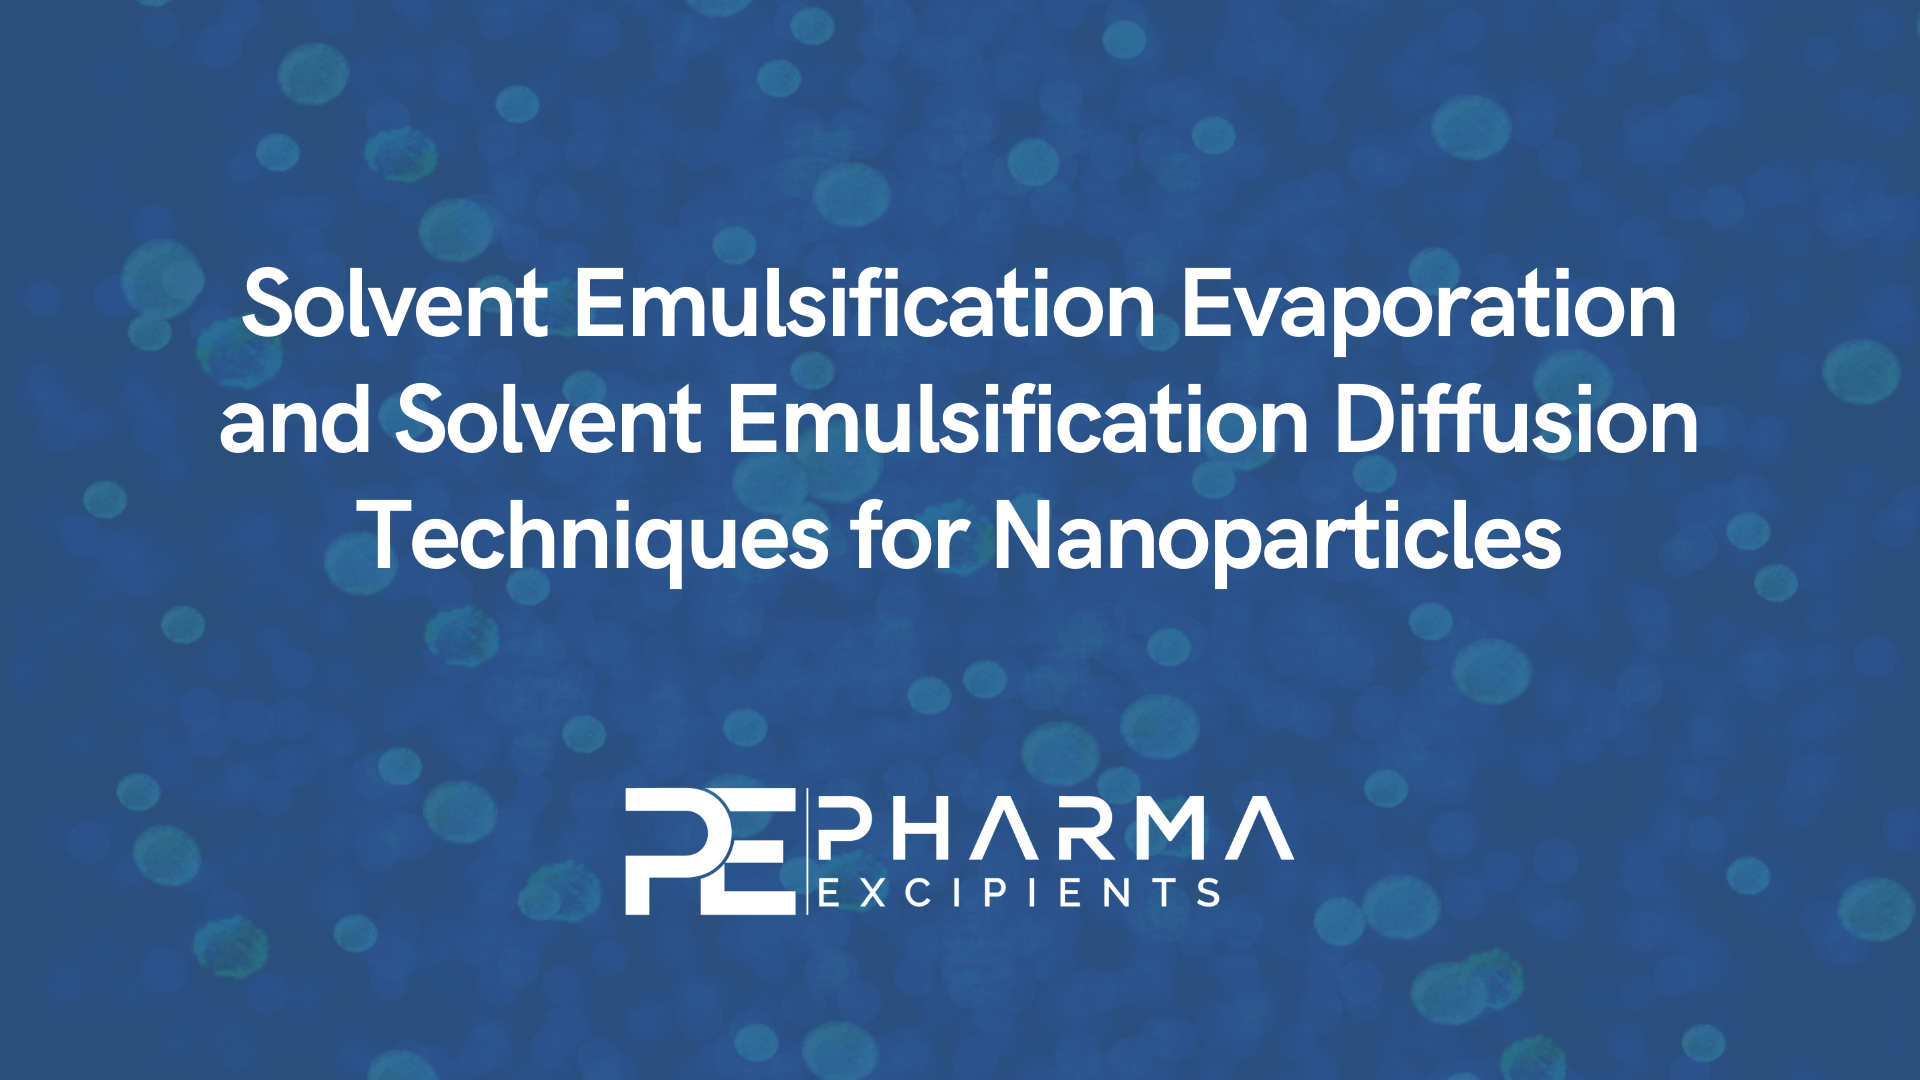 Solvent Emulsification Evaporation and Solvent Emulsification Diffusion Techniques for Nanoparticles